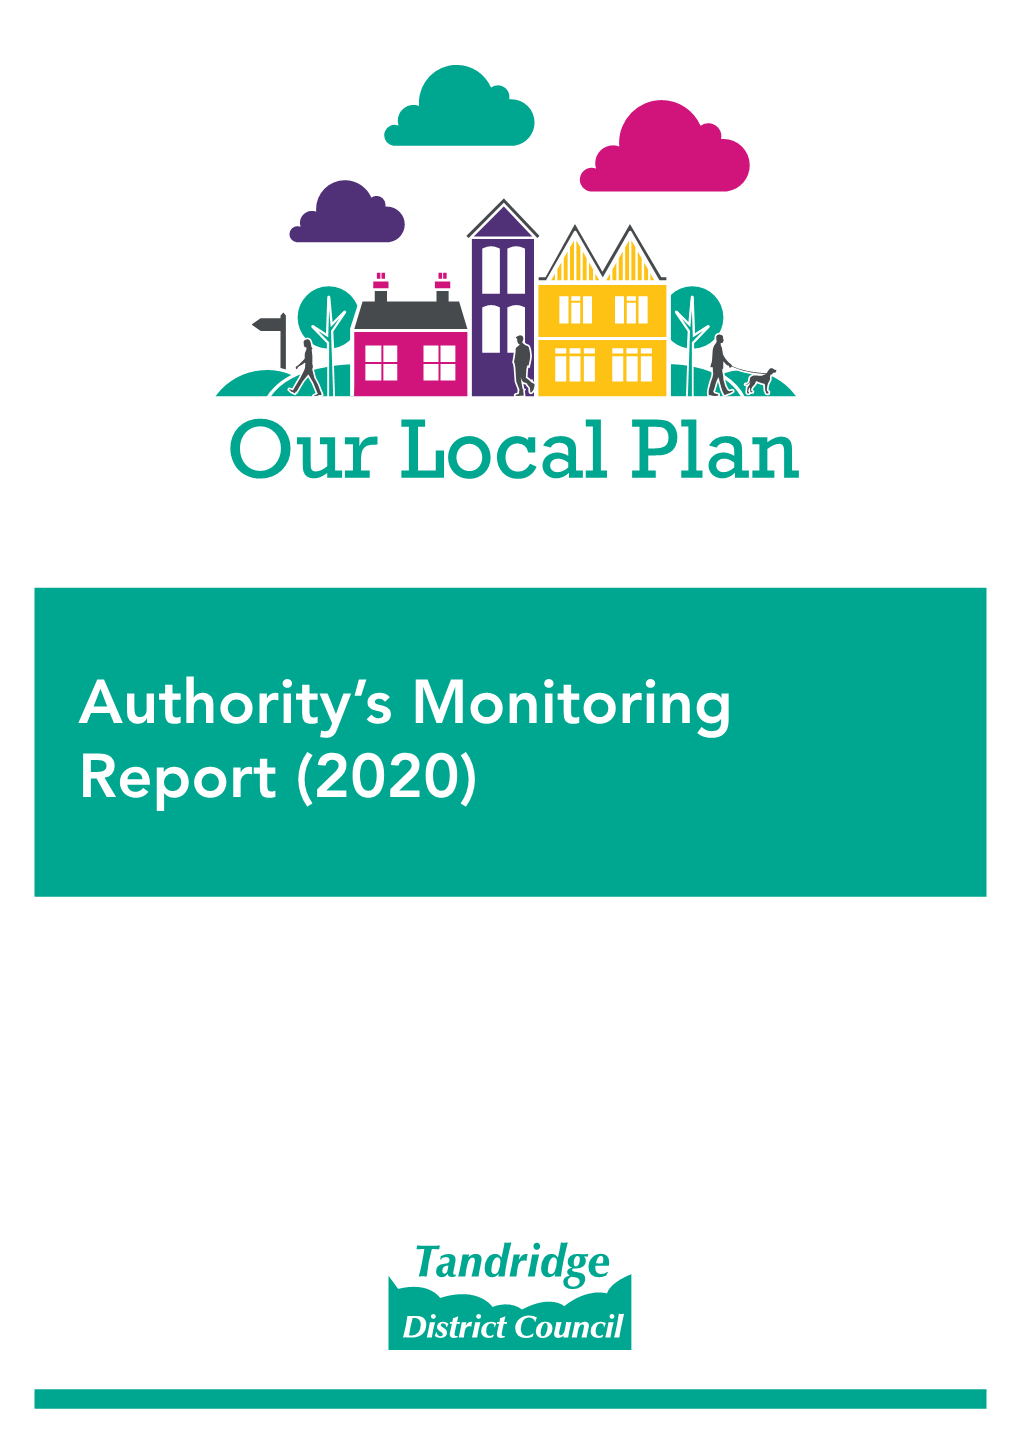 Authority's Monitoring Report